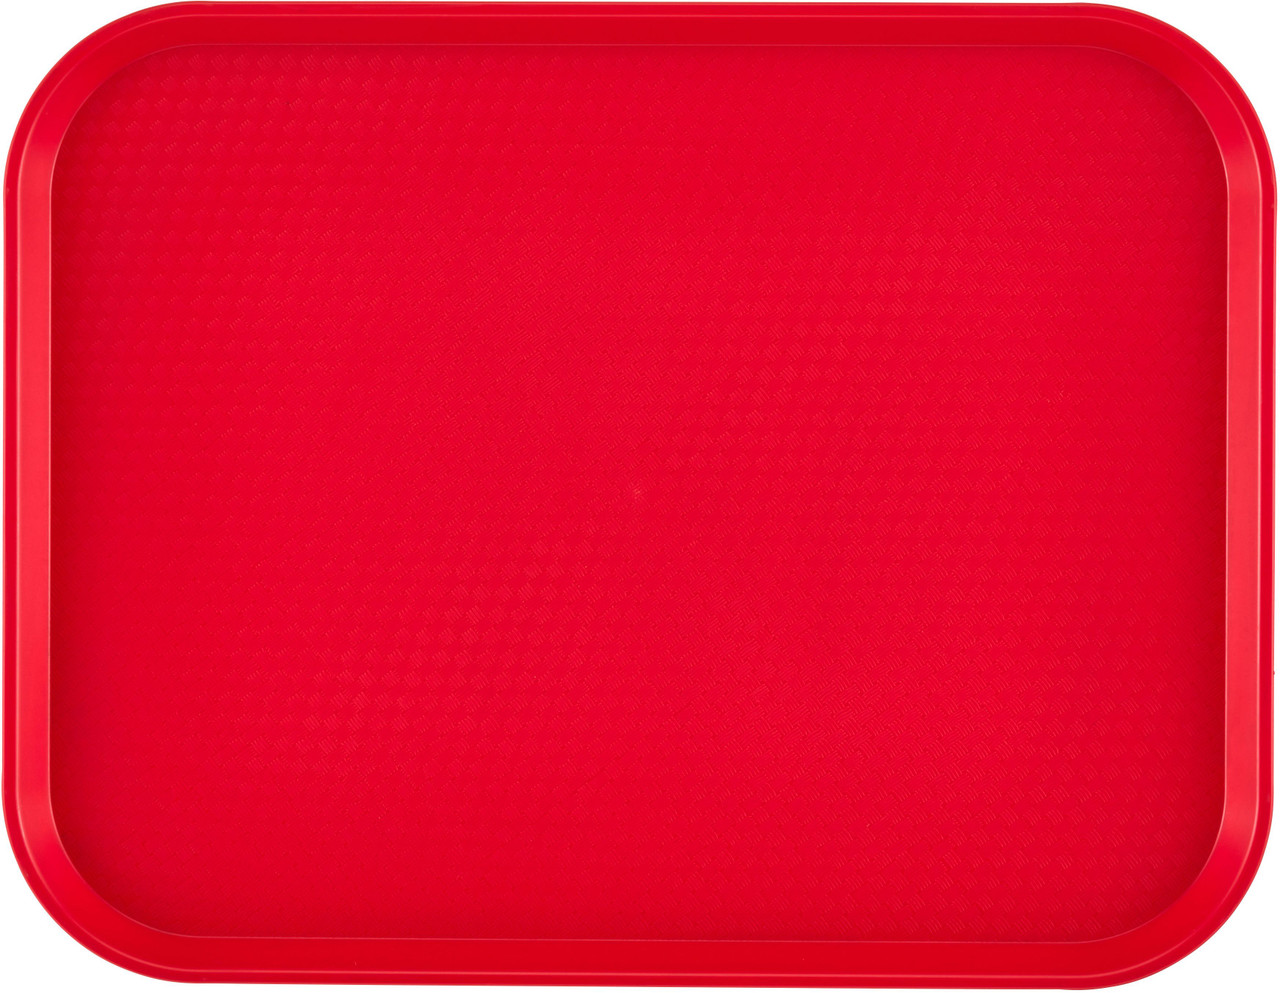 Cambro 1014FF163 Fast Food Tray - 10" x 14" - Red